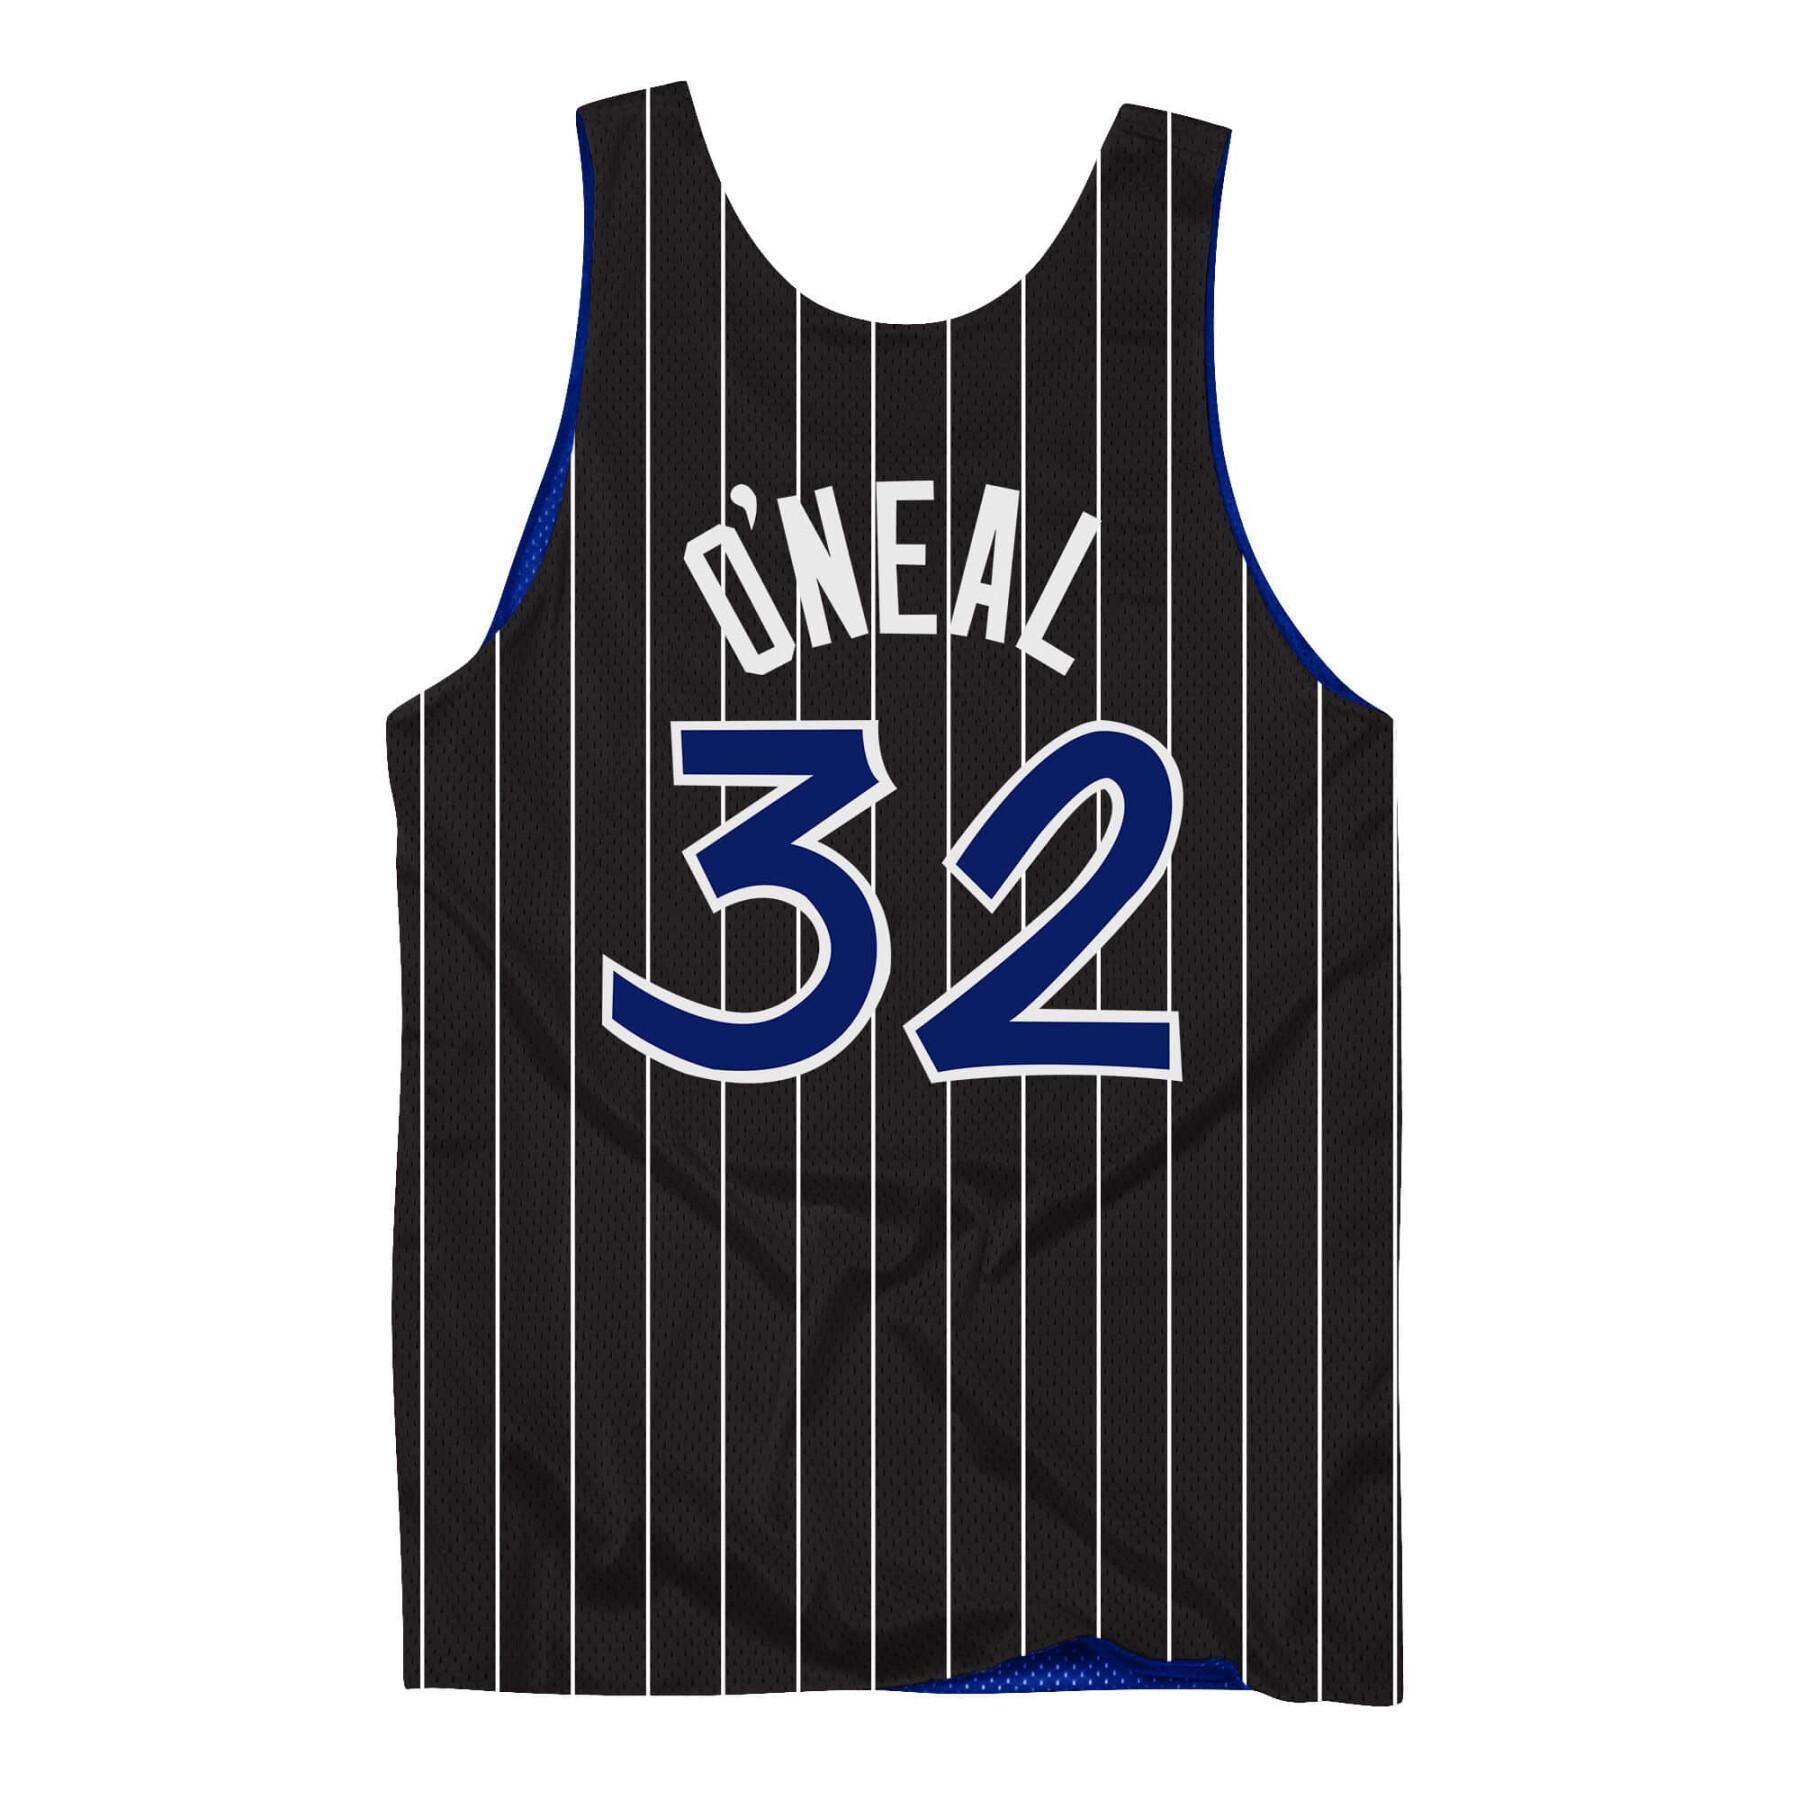 Omkeerbare jersey Orlando Magic Shaquille O'Neal